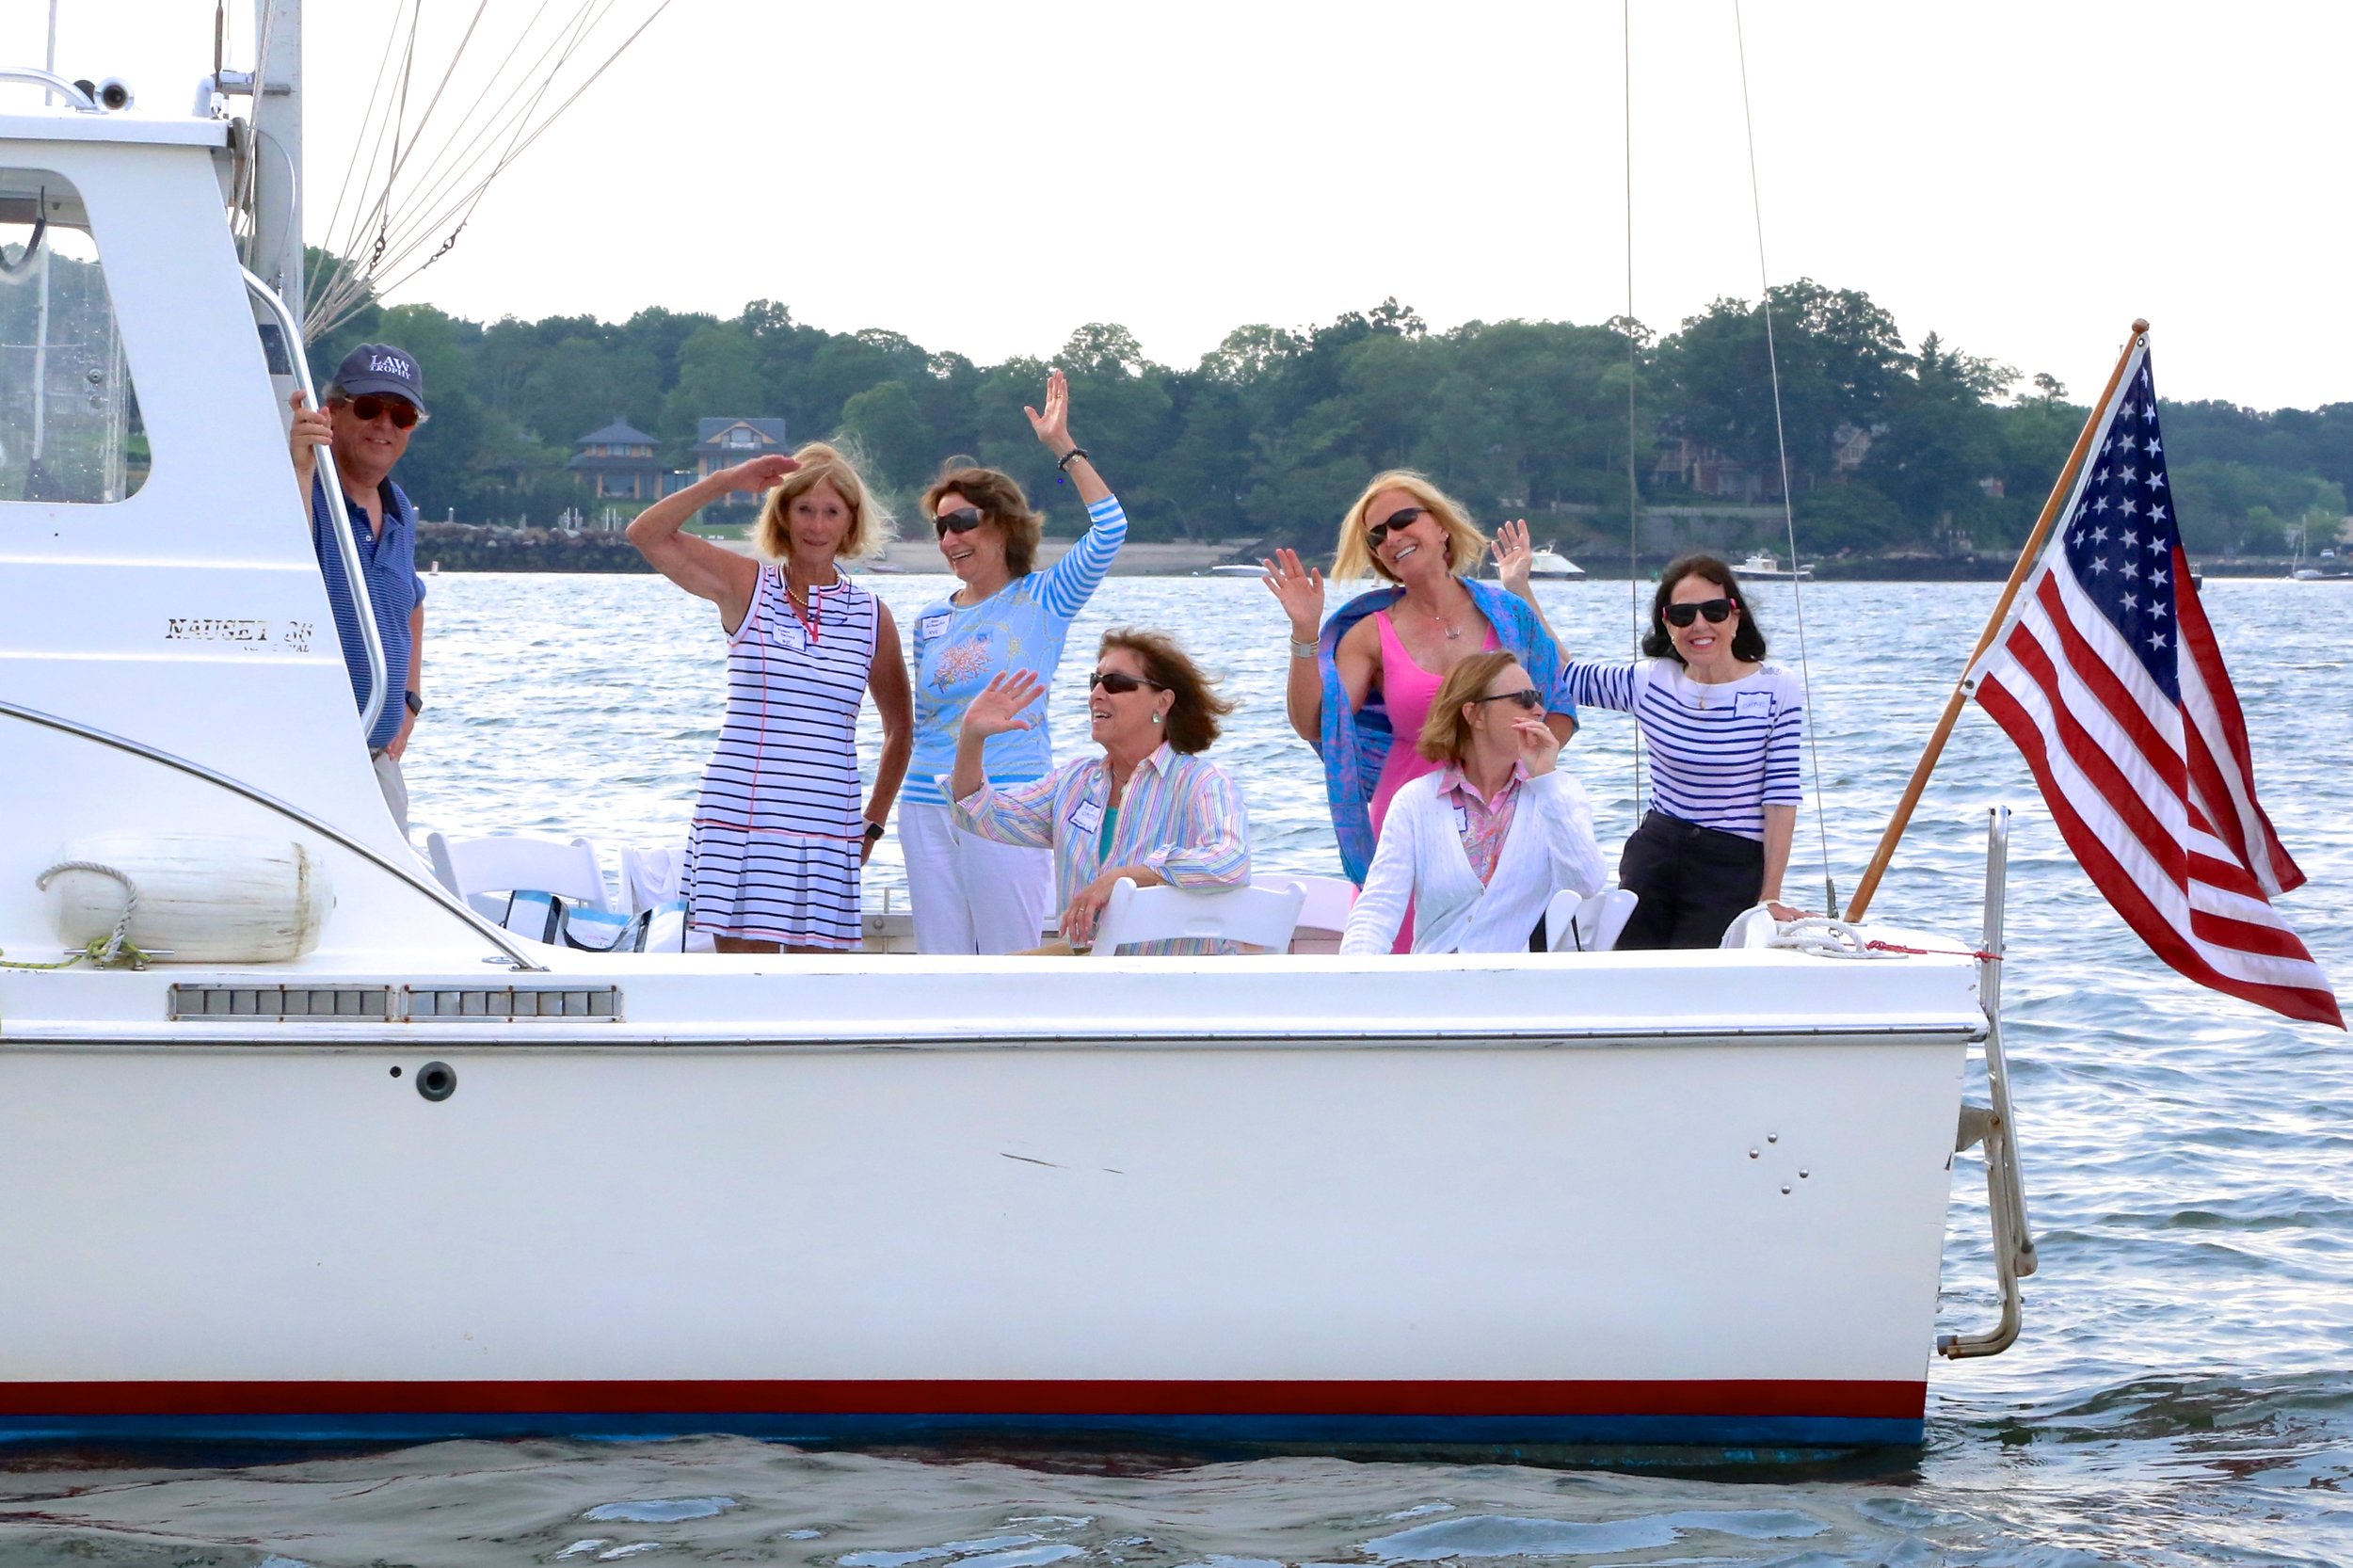 Links to useful womens sailing organizations and sailing education — Women on the Water Long Island Sound CT and NY